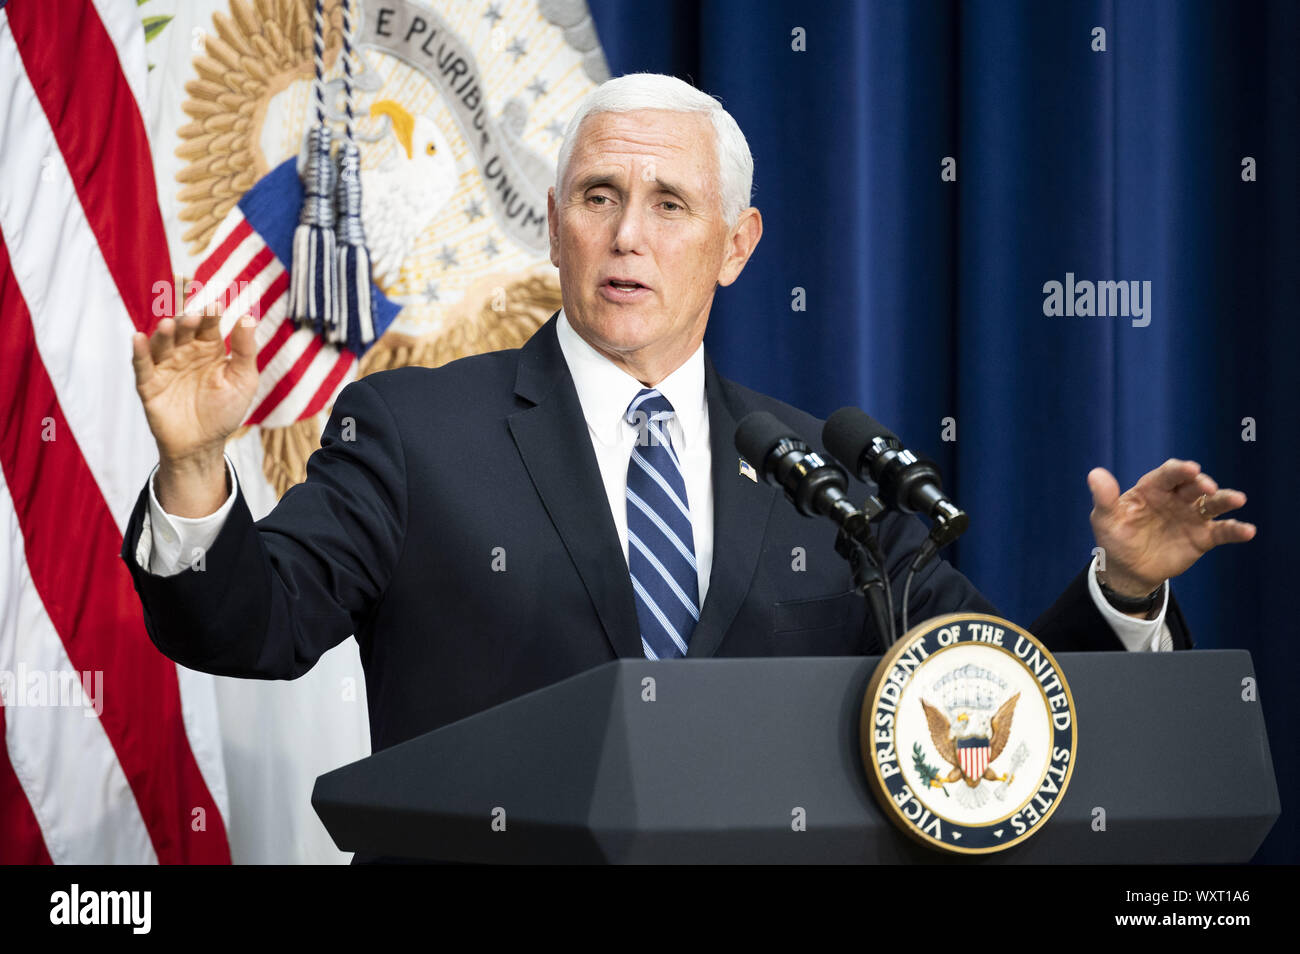 Washington, DC, USA. 17th Sep, 2019. September 17, 2019 - Washington, DC, United States: Vice President MIKE PENCE speaking at a Naturalization Ceremony in the South Court Auditorium at the White House in the Eisenhower Executive Office Building. Credit: Michael Brochstein/ZUMA Wire/Alamy Live News Stock Photo